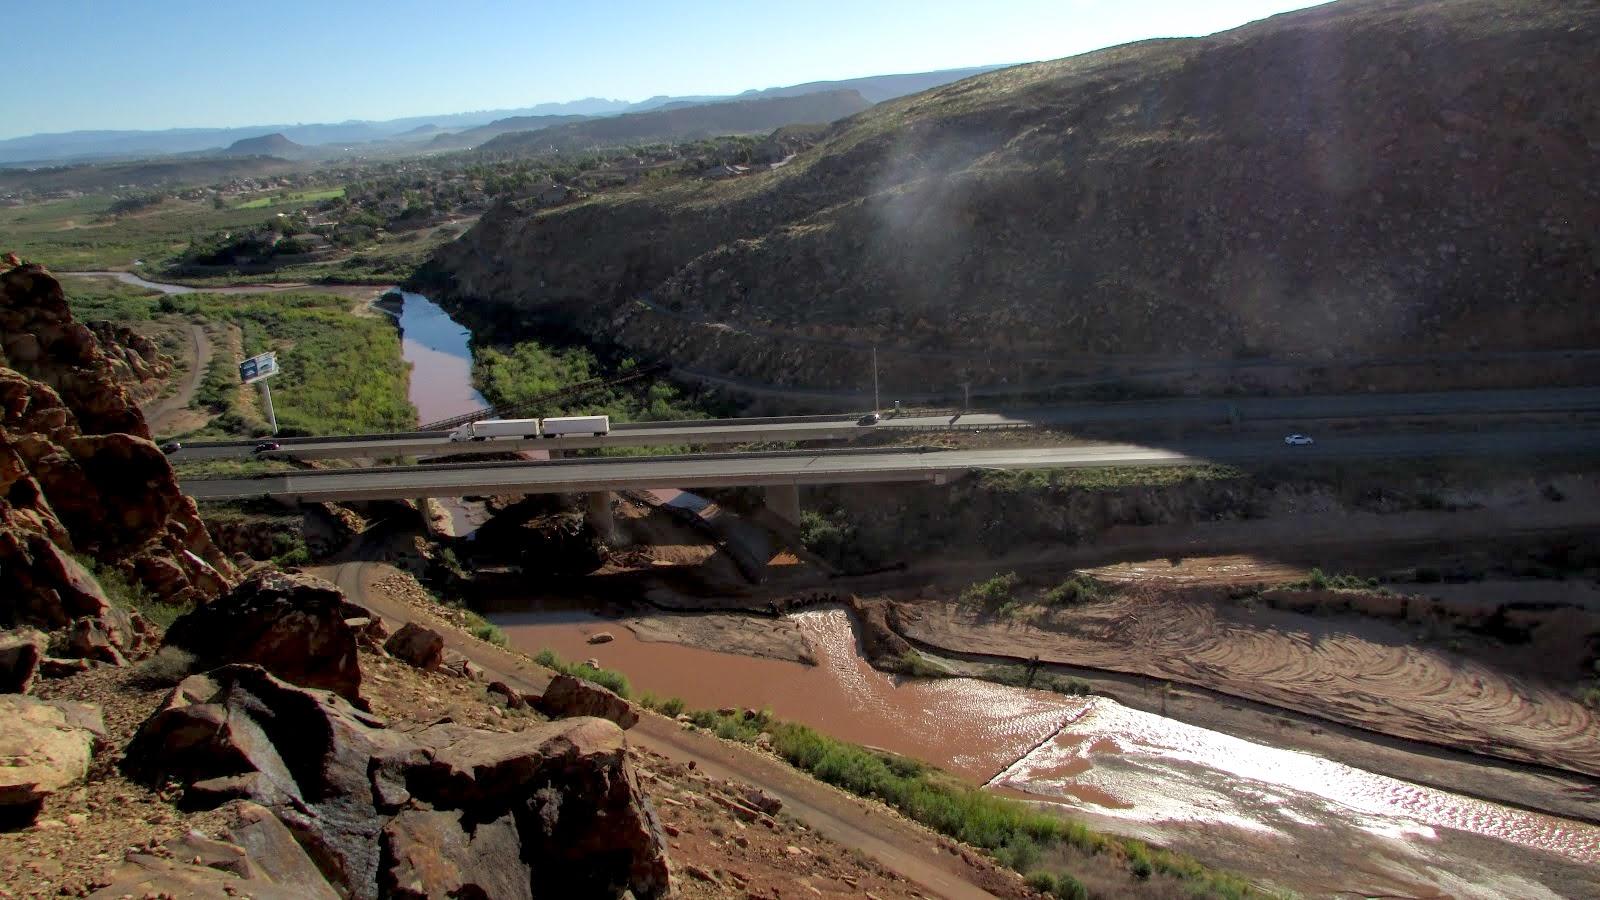 colorado river basin states: what new water shortage plans could